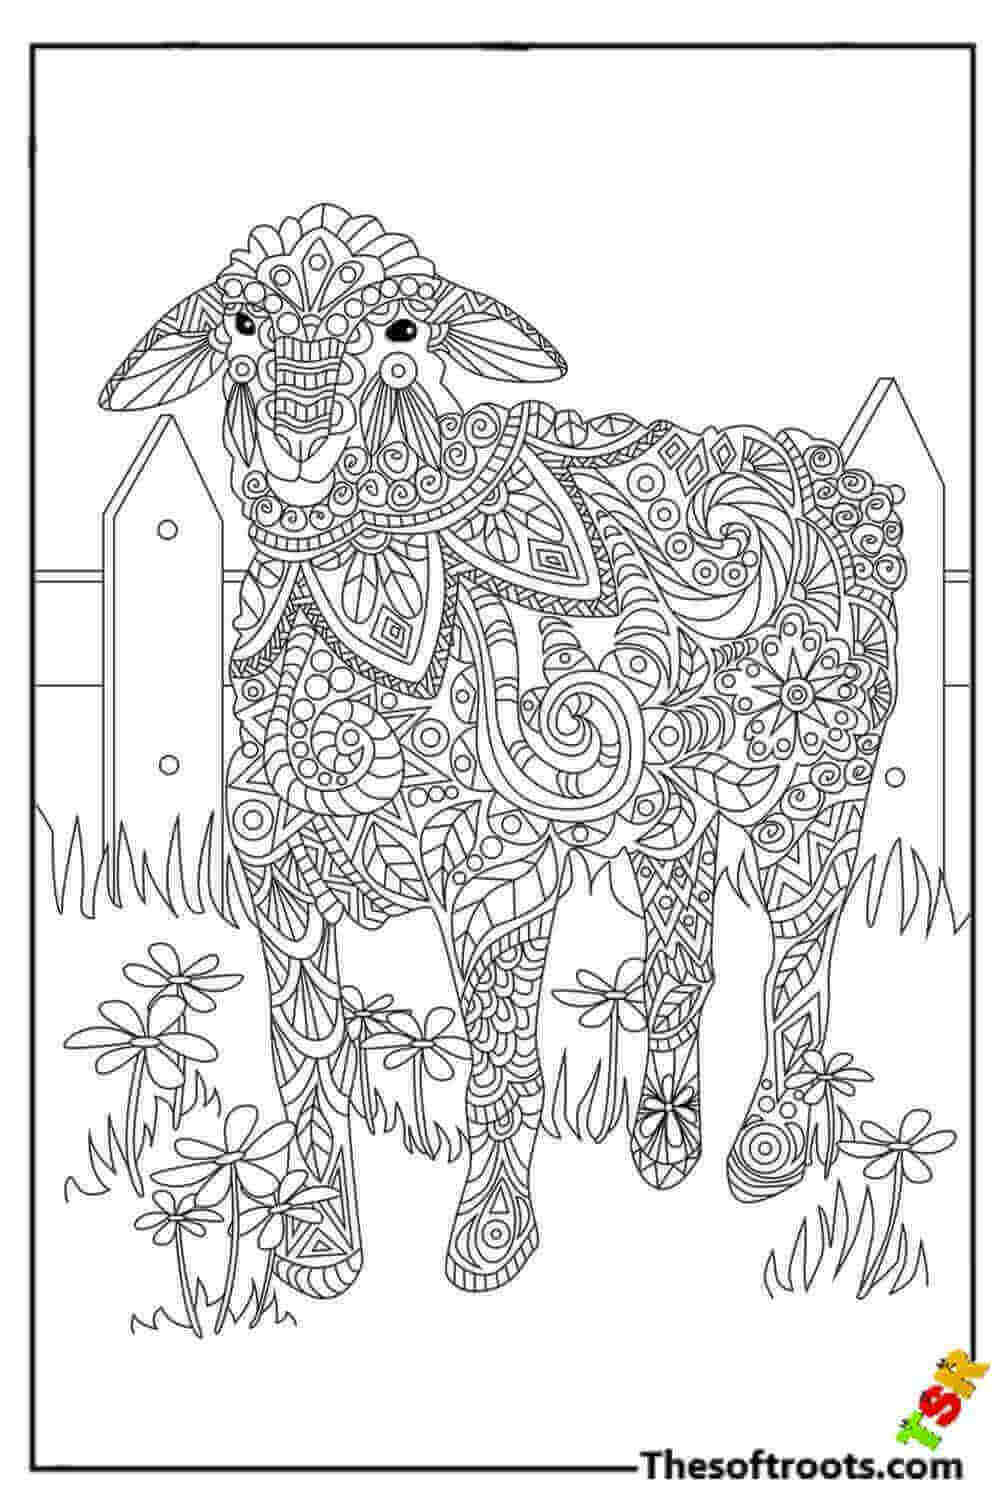 Adult Goat coloring pages